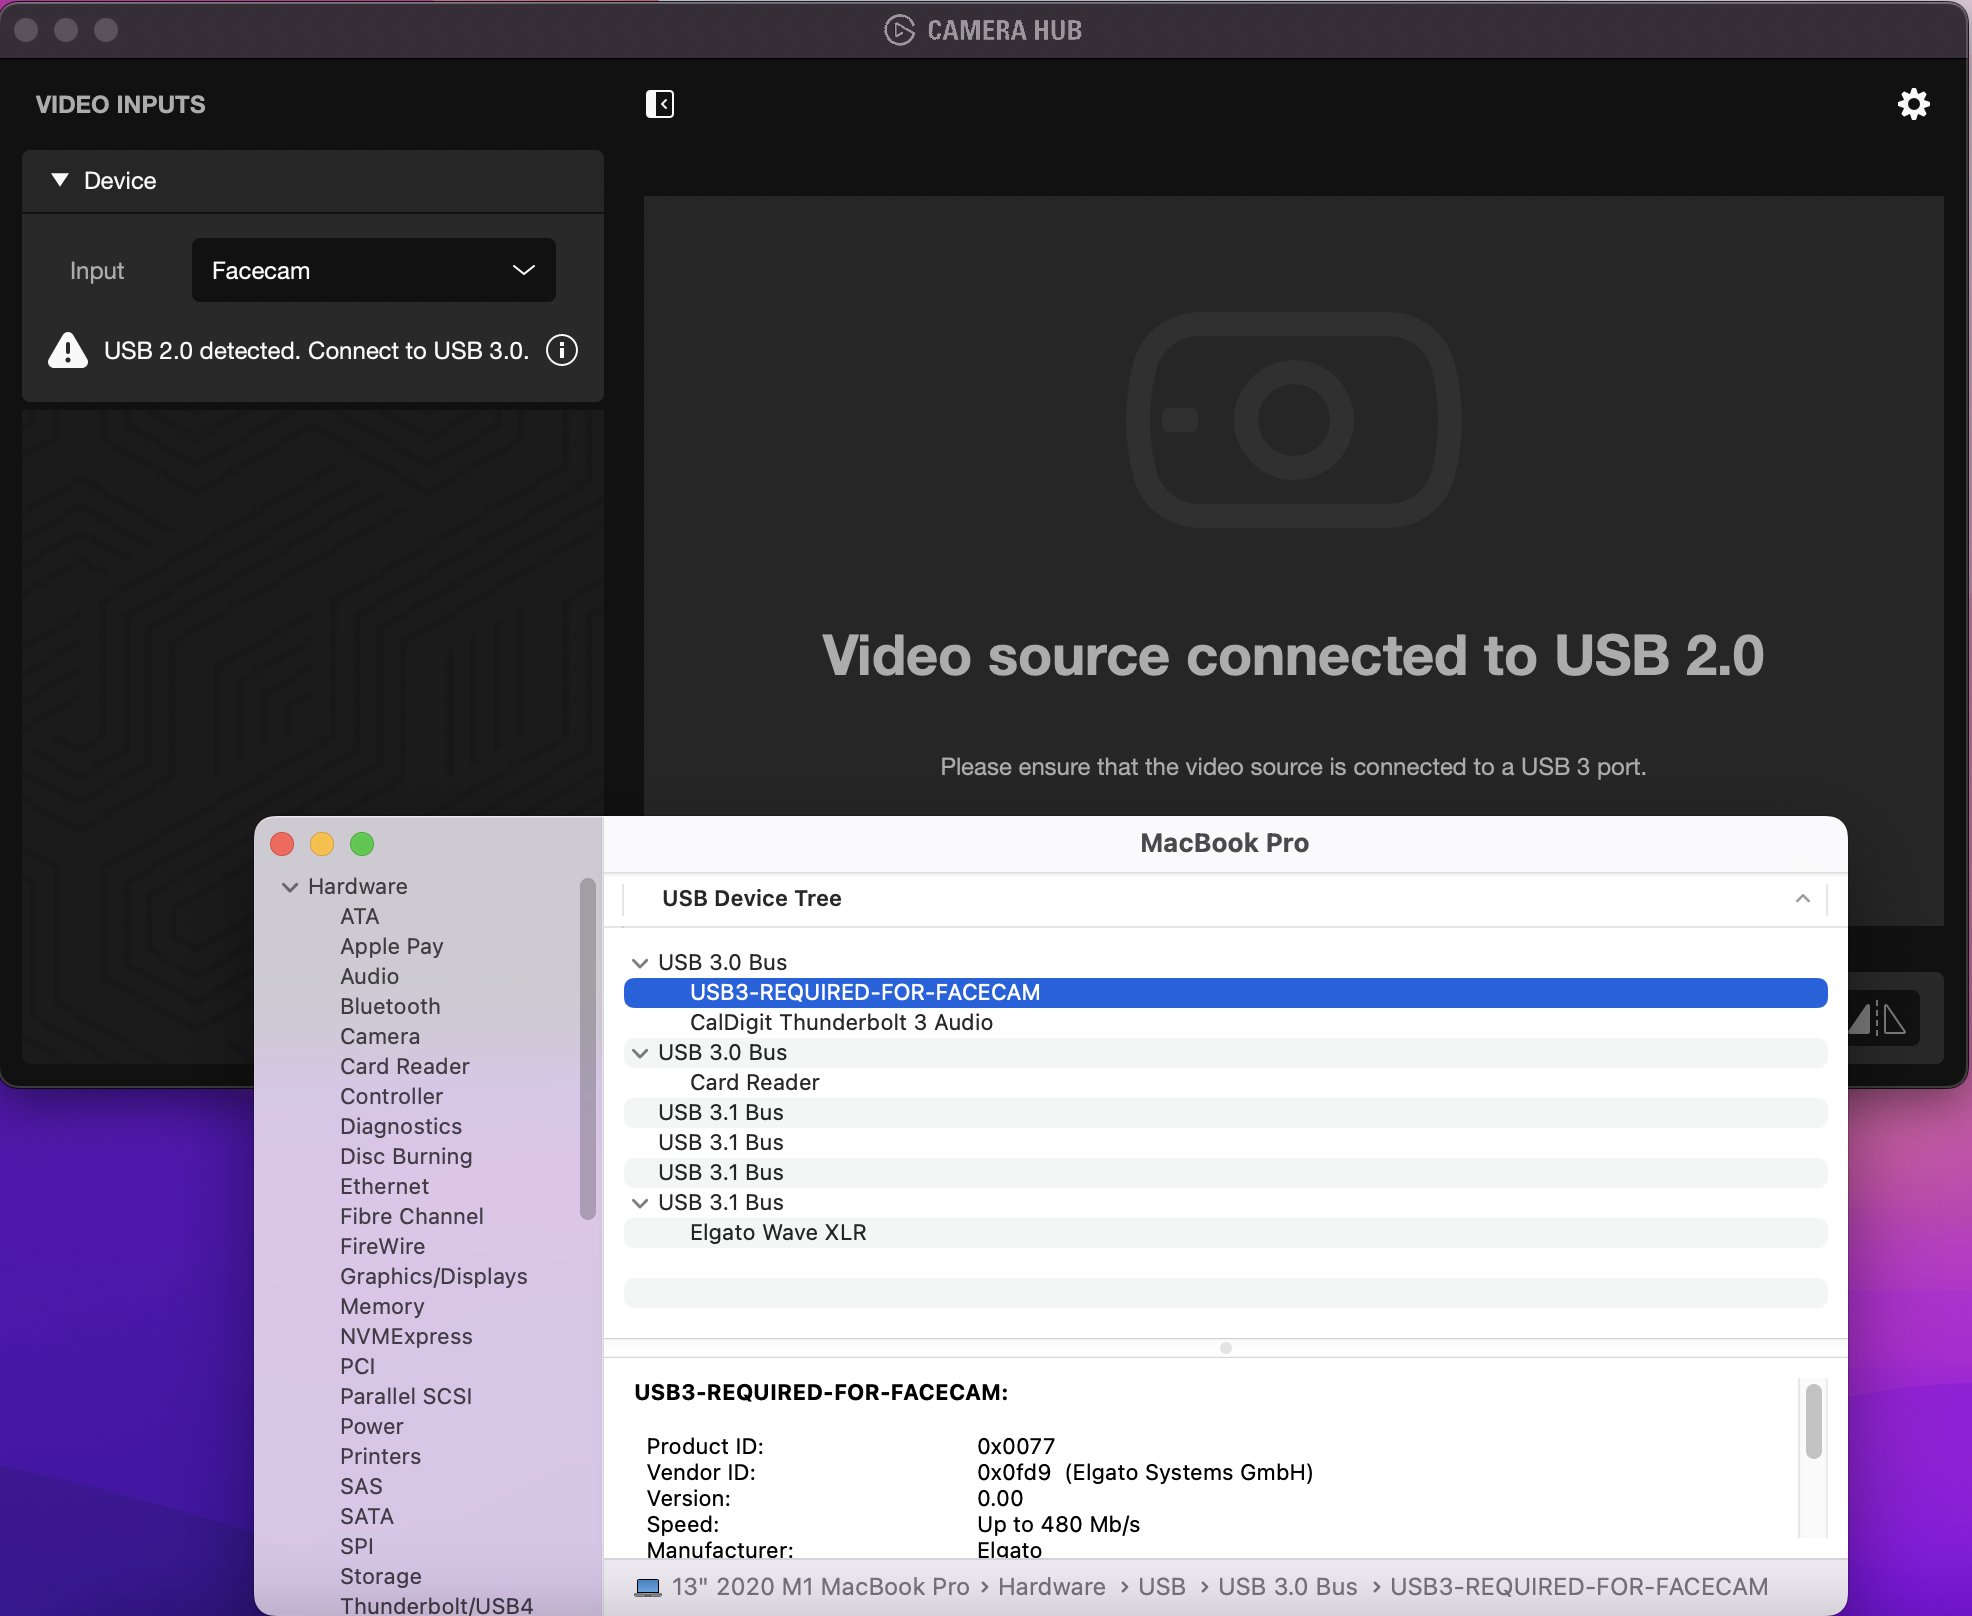 Chris Coyier on Twitter: "Yo @elgato — Why u say USB 3 is required when the Facecam is 100% plugged into a 3 port with USB 3 cable? / X